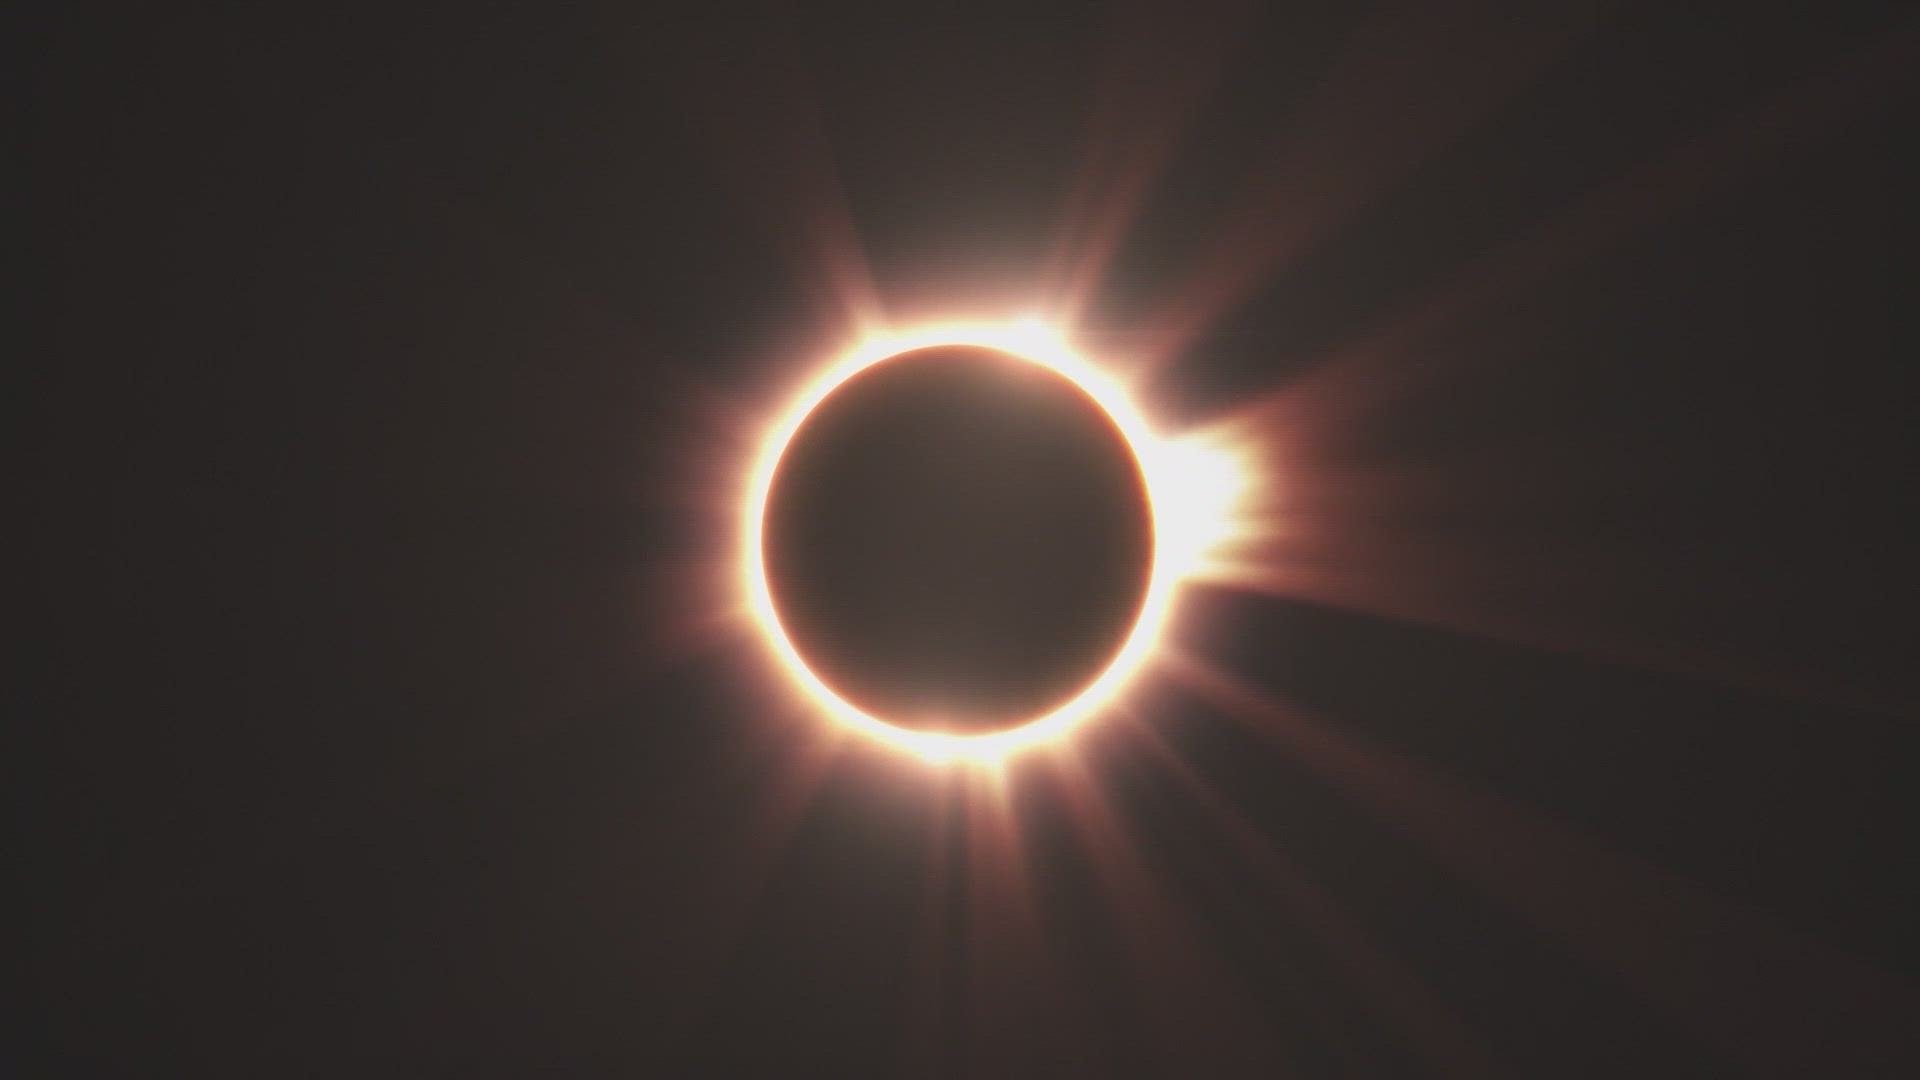 The moon, being farther away from us, appears smaller than the sun and does not fully cover it, resulting in the "ring of fire" illusion and makes an annular eclipse